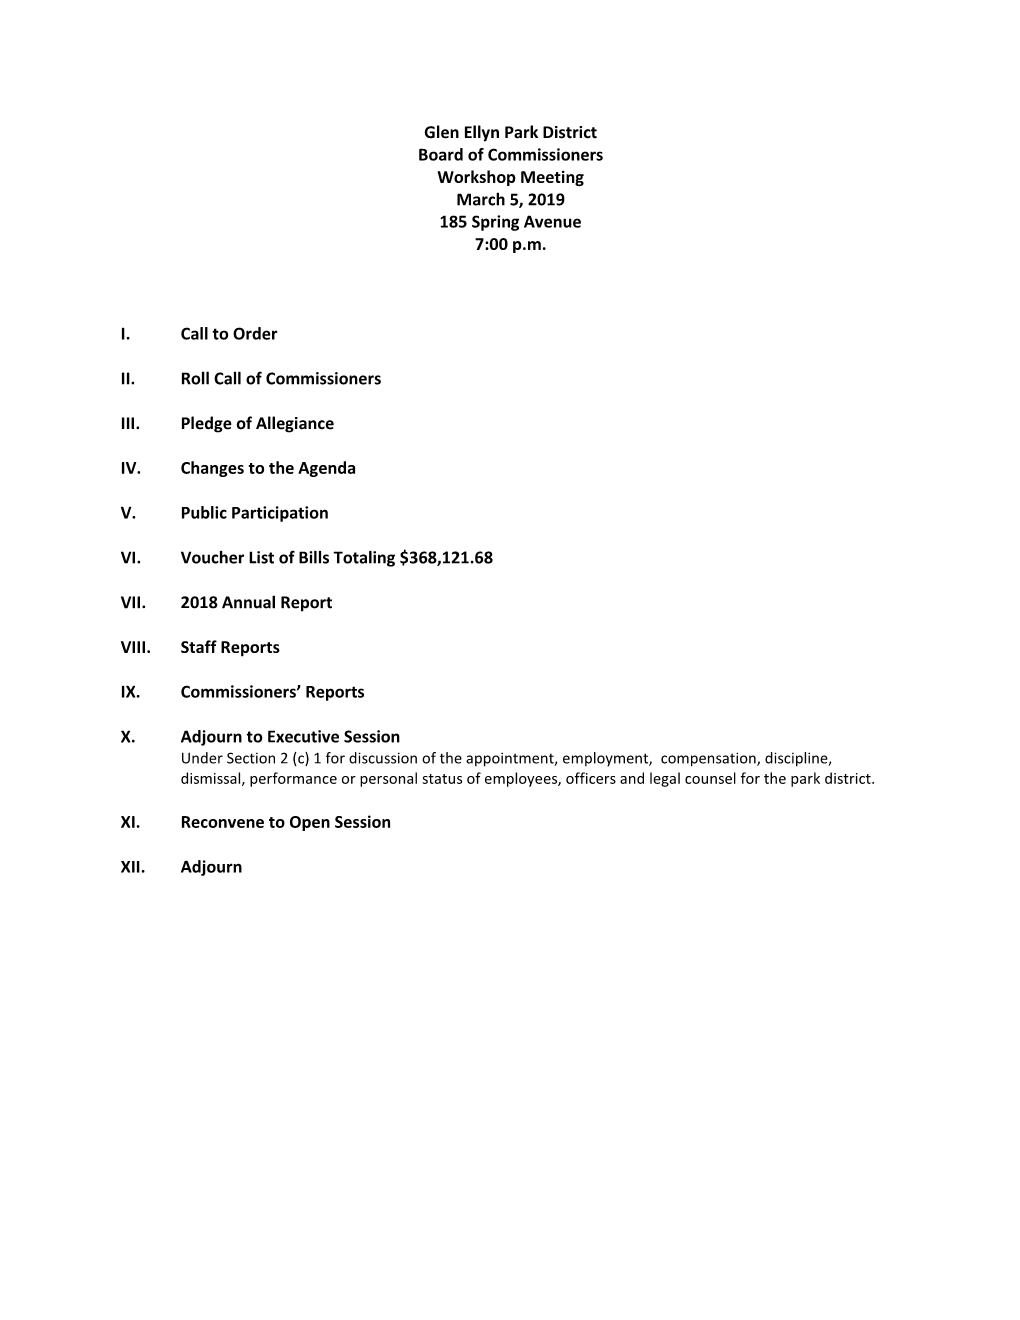 Glen Ellyn Park District Board of Commissioners Workshop Meeting March 5, 2019 185 Spring Avenue 7:00 P.M